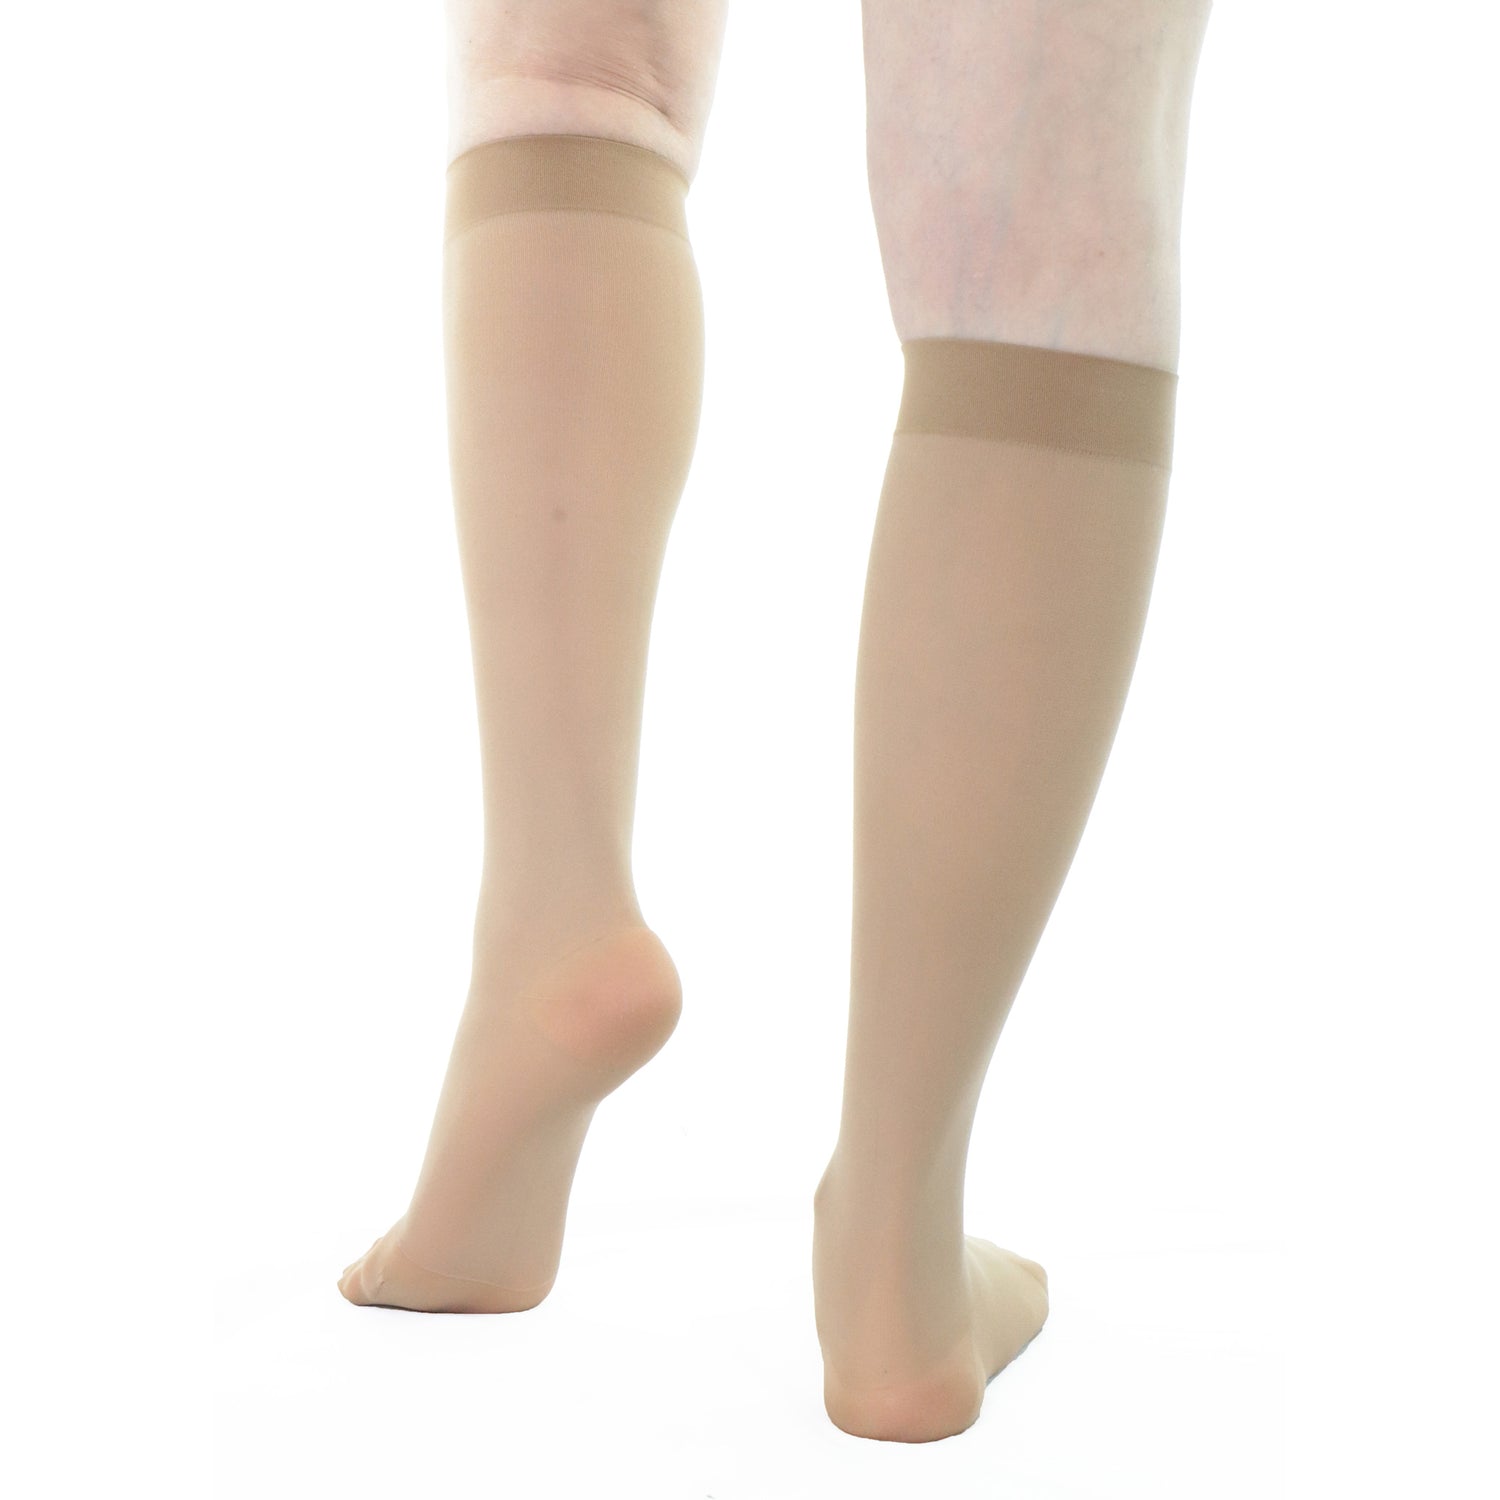 Calf compression socks for women by Doctor Brace in 20-30 mmHg beige sheer fabric rear view